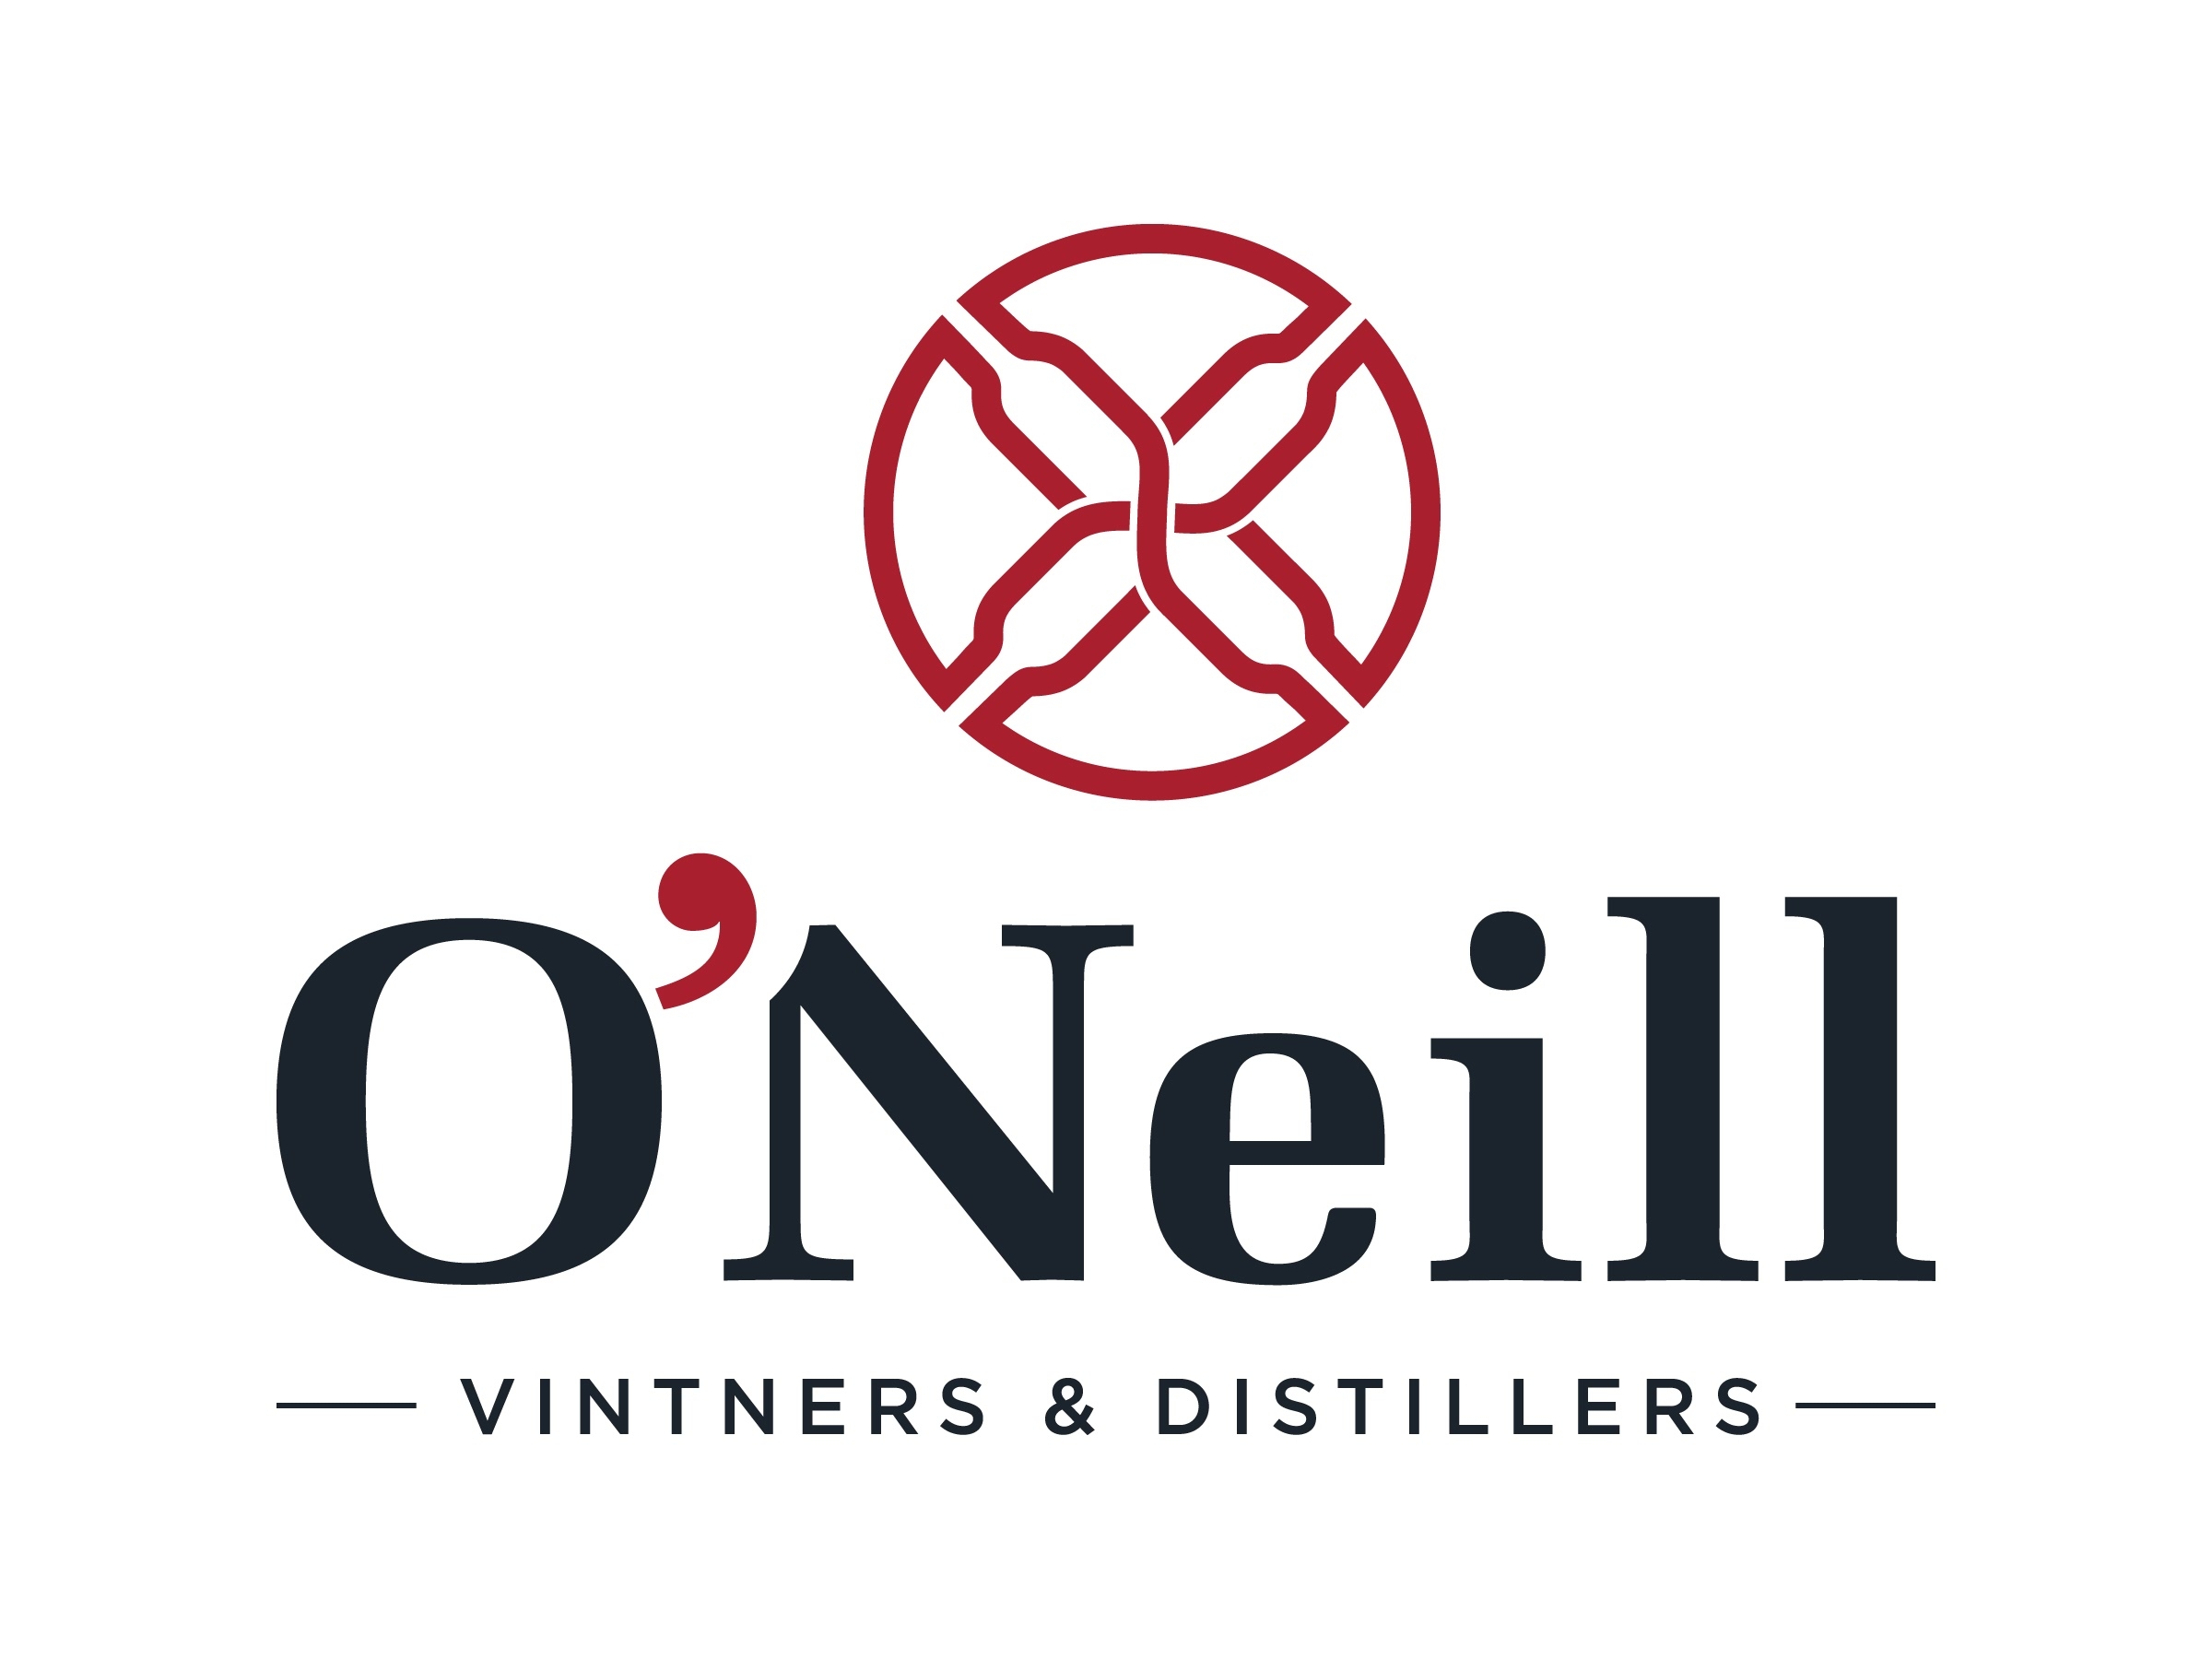 ONEILL VINTNERS